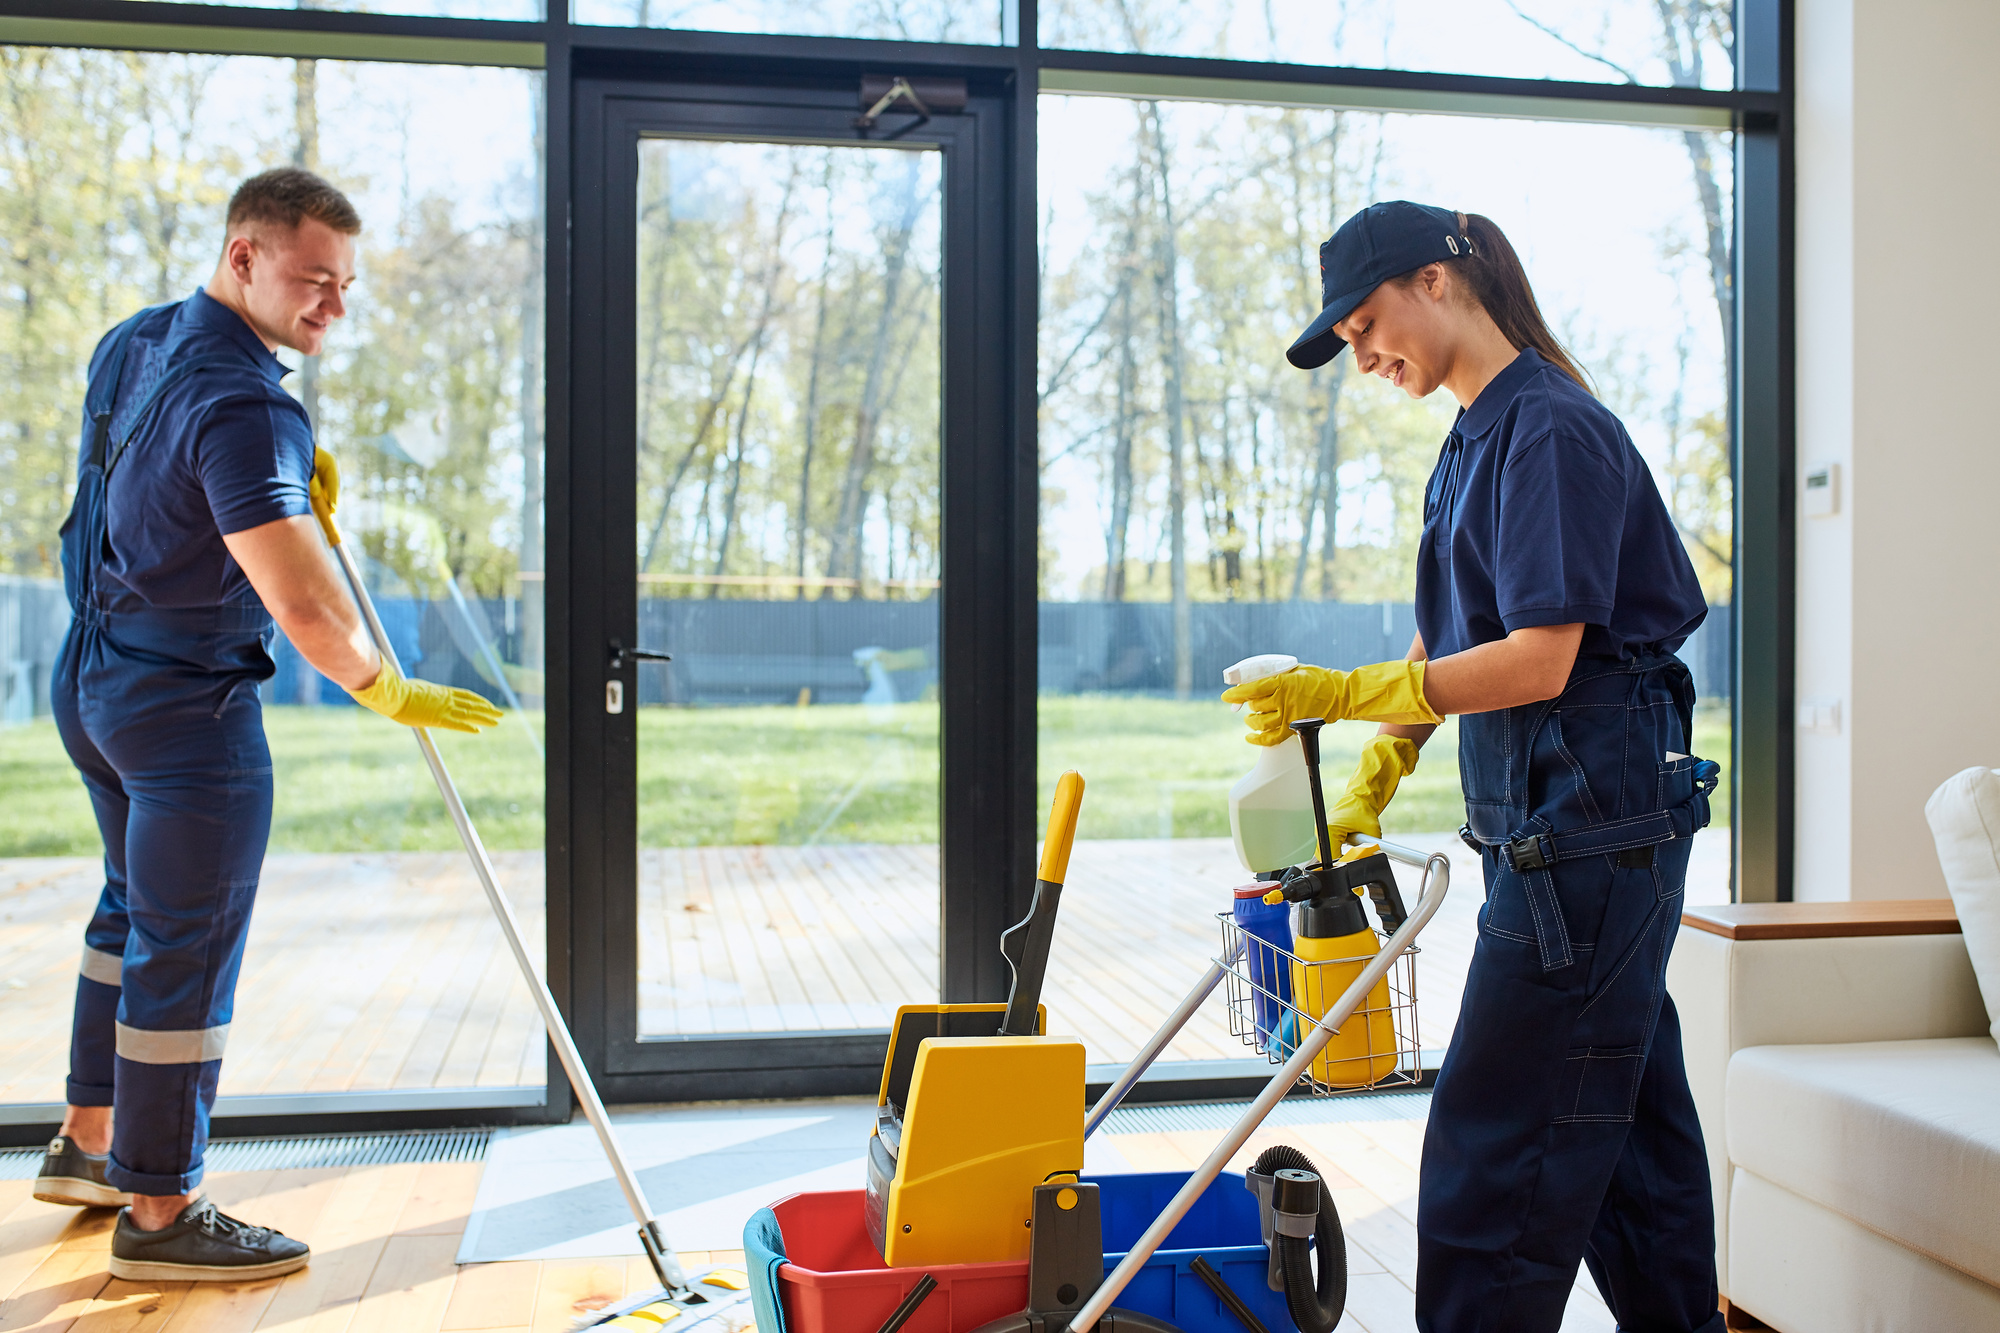 4 Ways Cleaning Companies Can Build Lasting Relationships With Customers